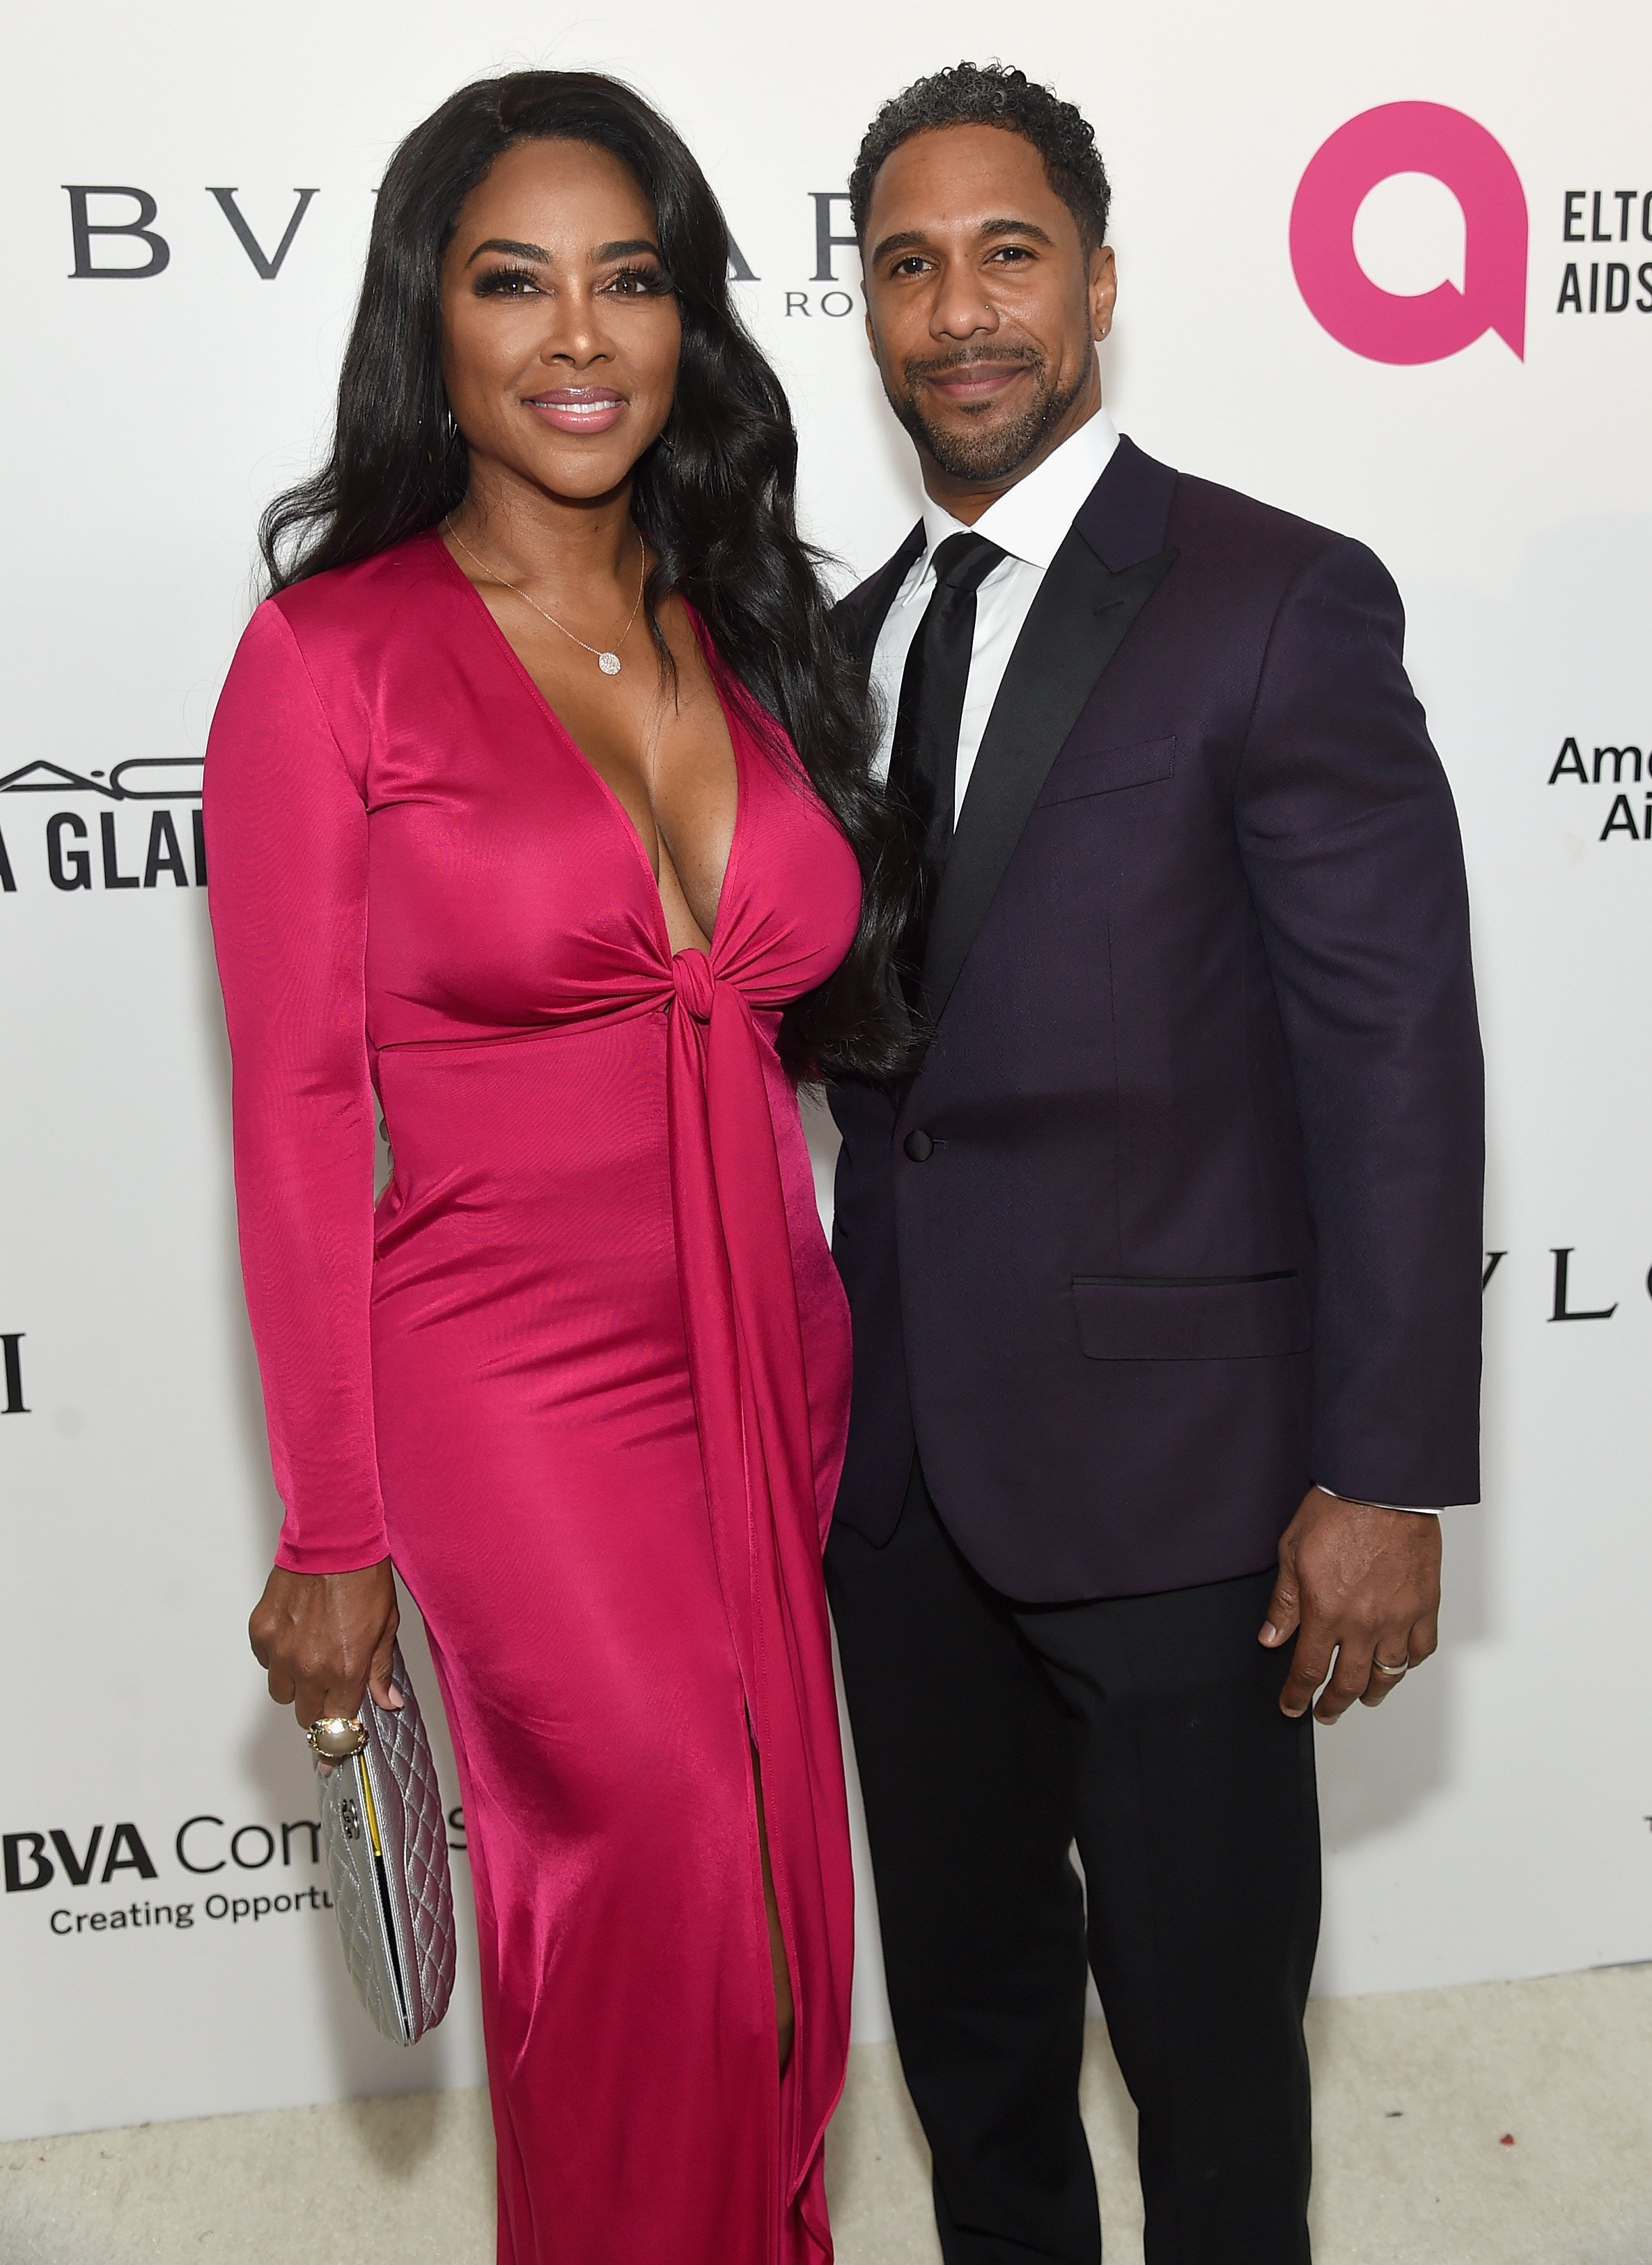 Kenya Moore & Marc Daly at the Elton John AIDS Foundation's Academy Awards Viewing Party in California on Mar. 4, 2018 | Source: Getty Images/GlobalImagesUkraine